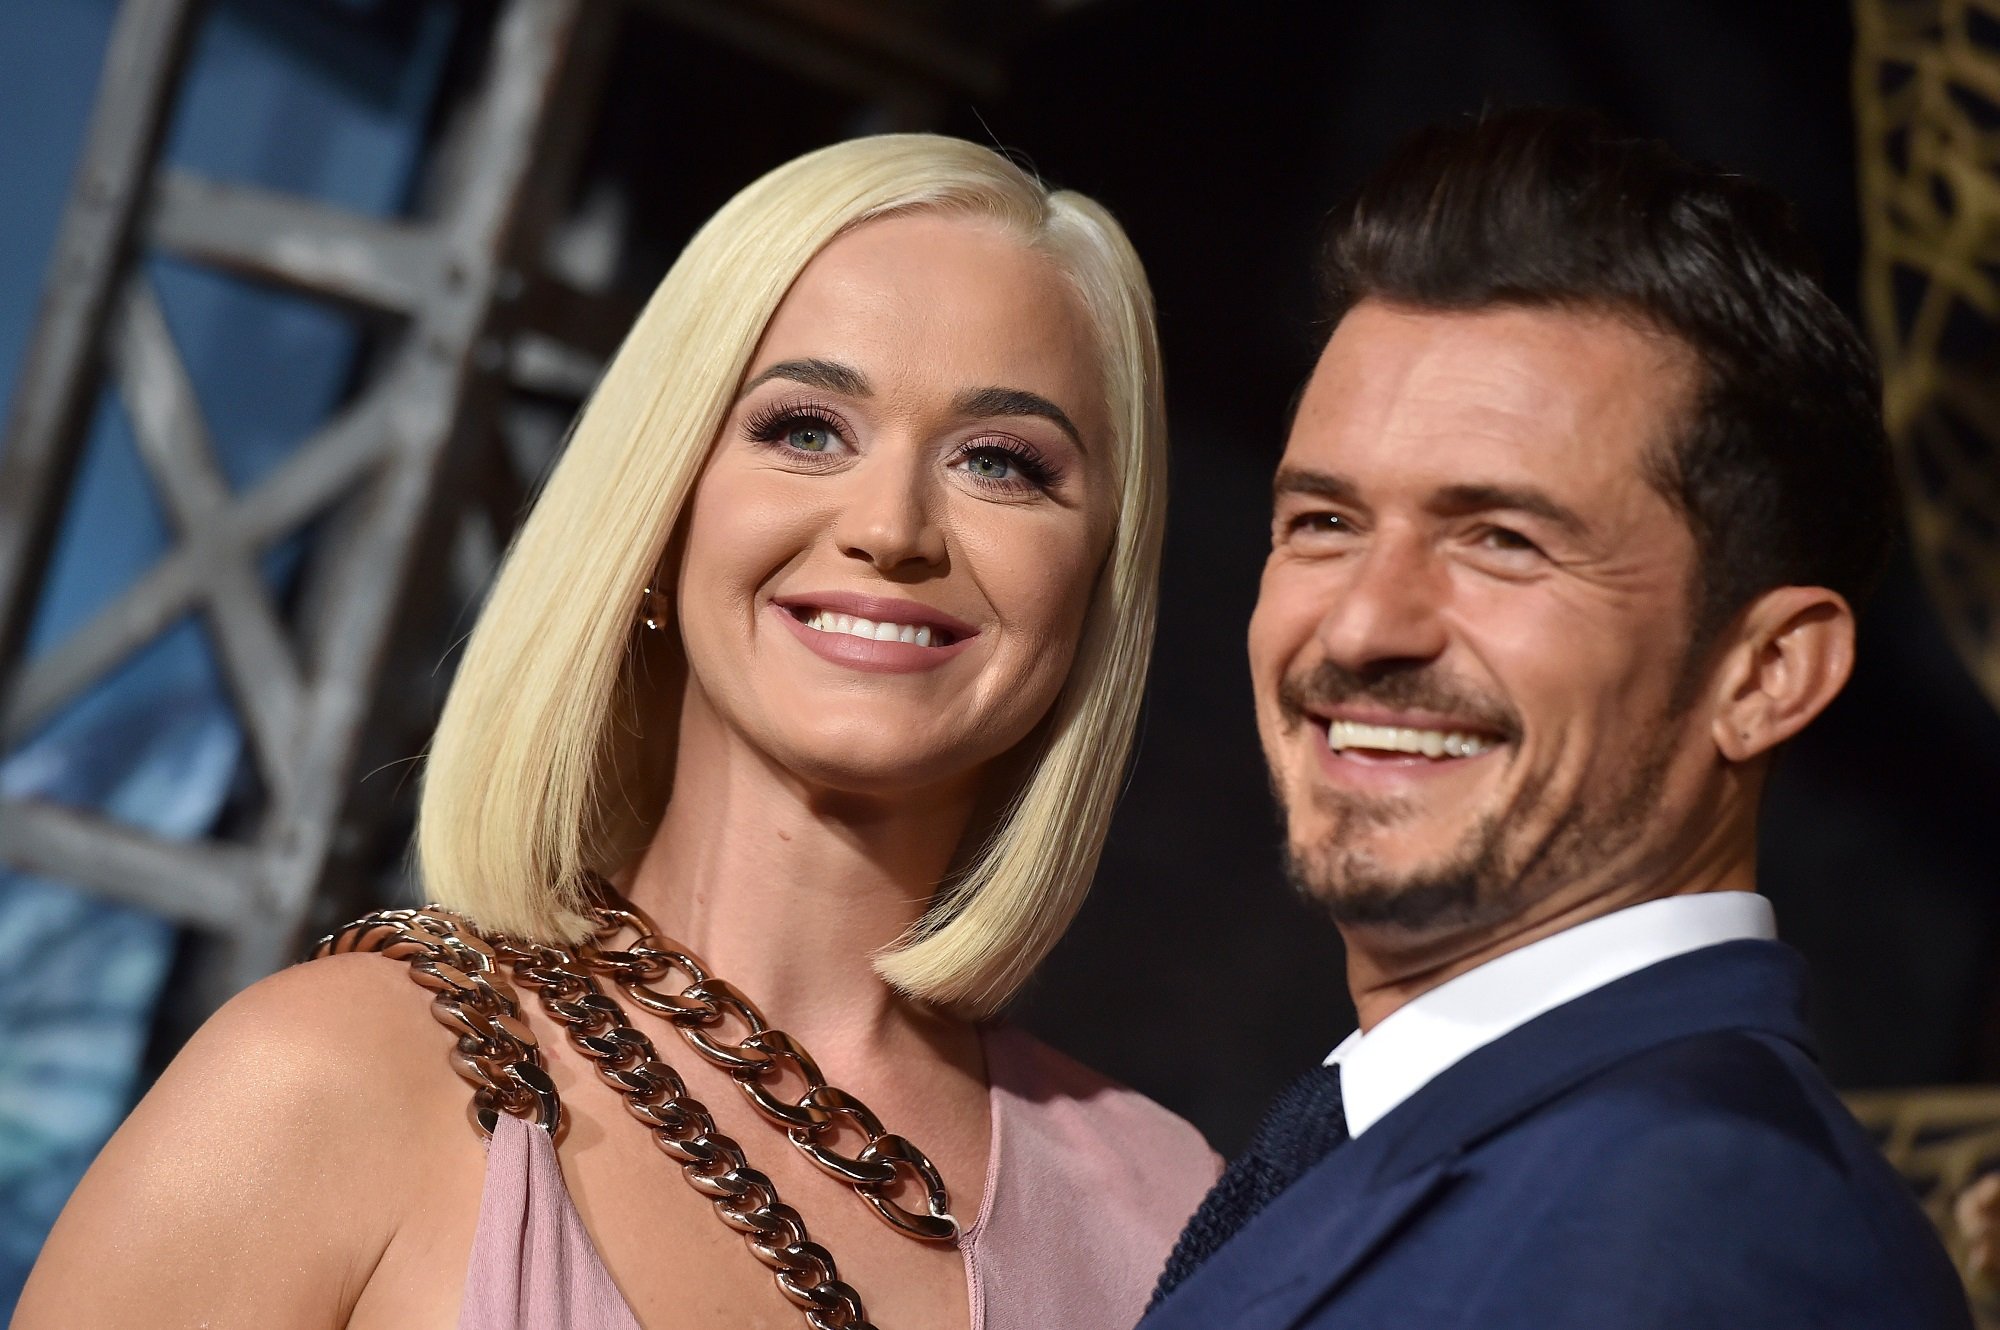 Katy Perry and Orlando Bloom got engaged with an expensive engagement ring in 2019.